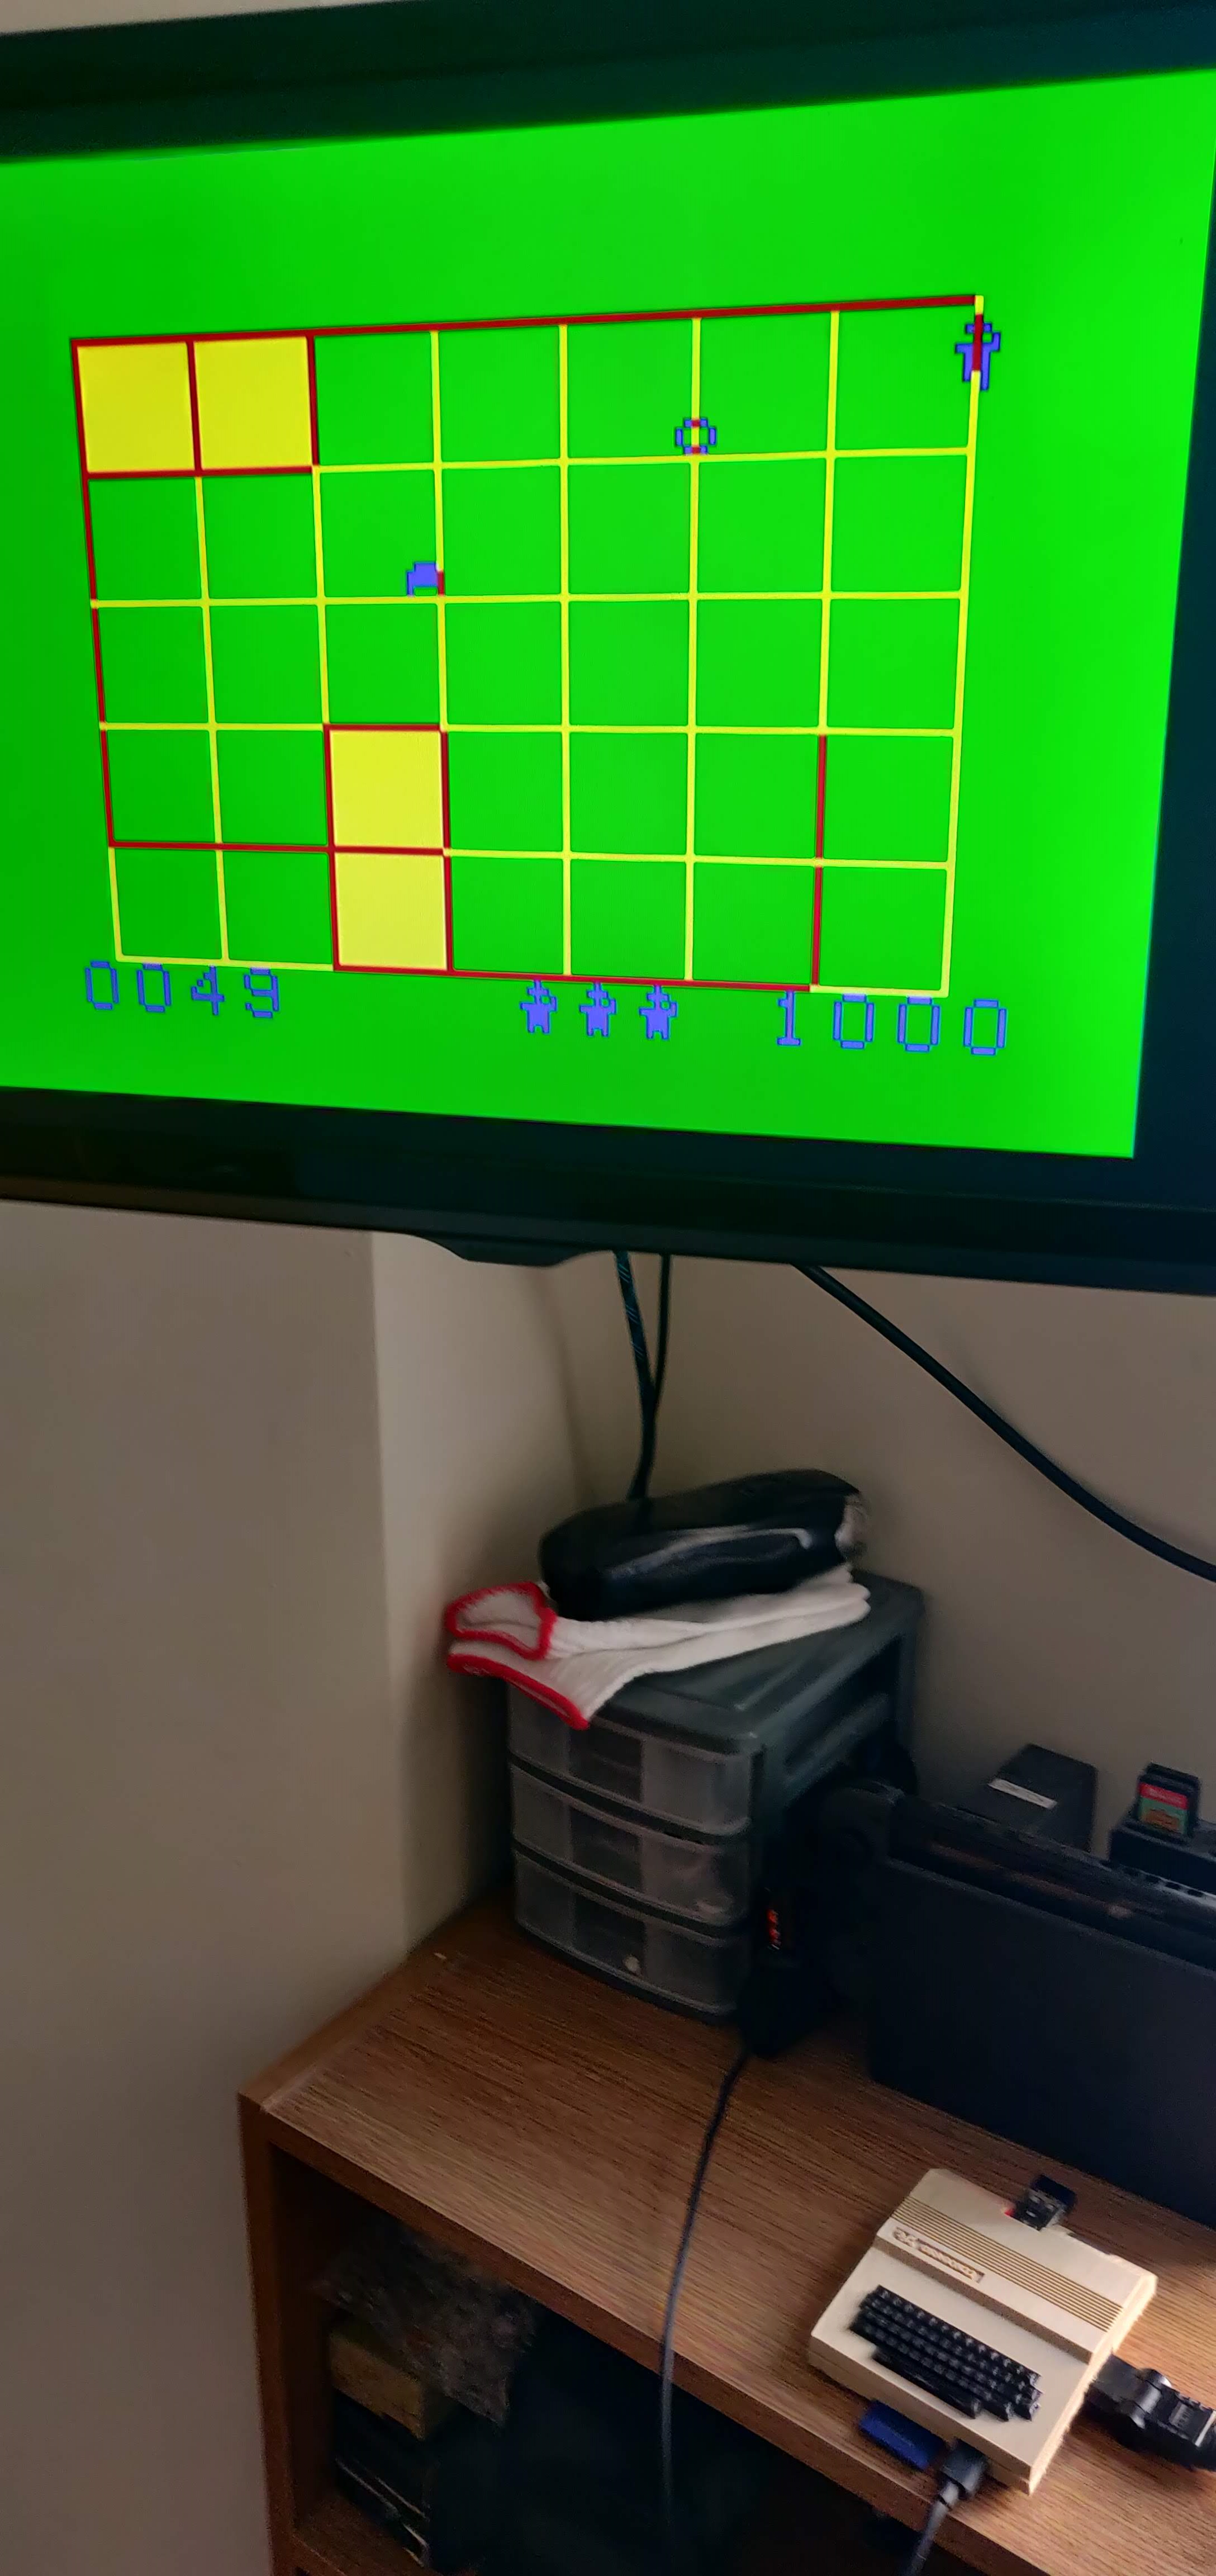 Cuthbert Goes Walkabout on a screen with the Raspberry Pi underneath